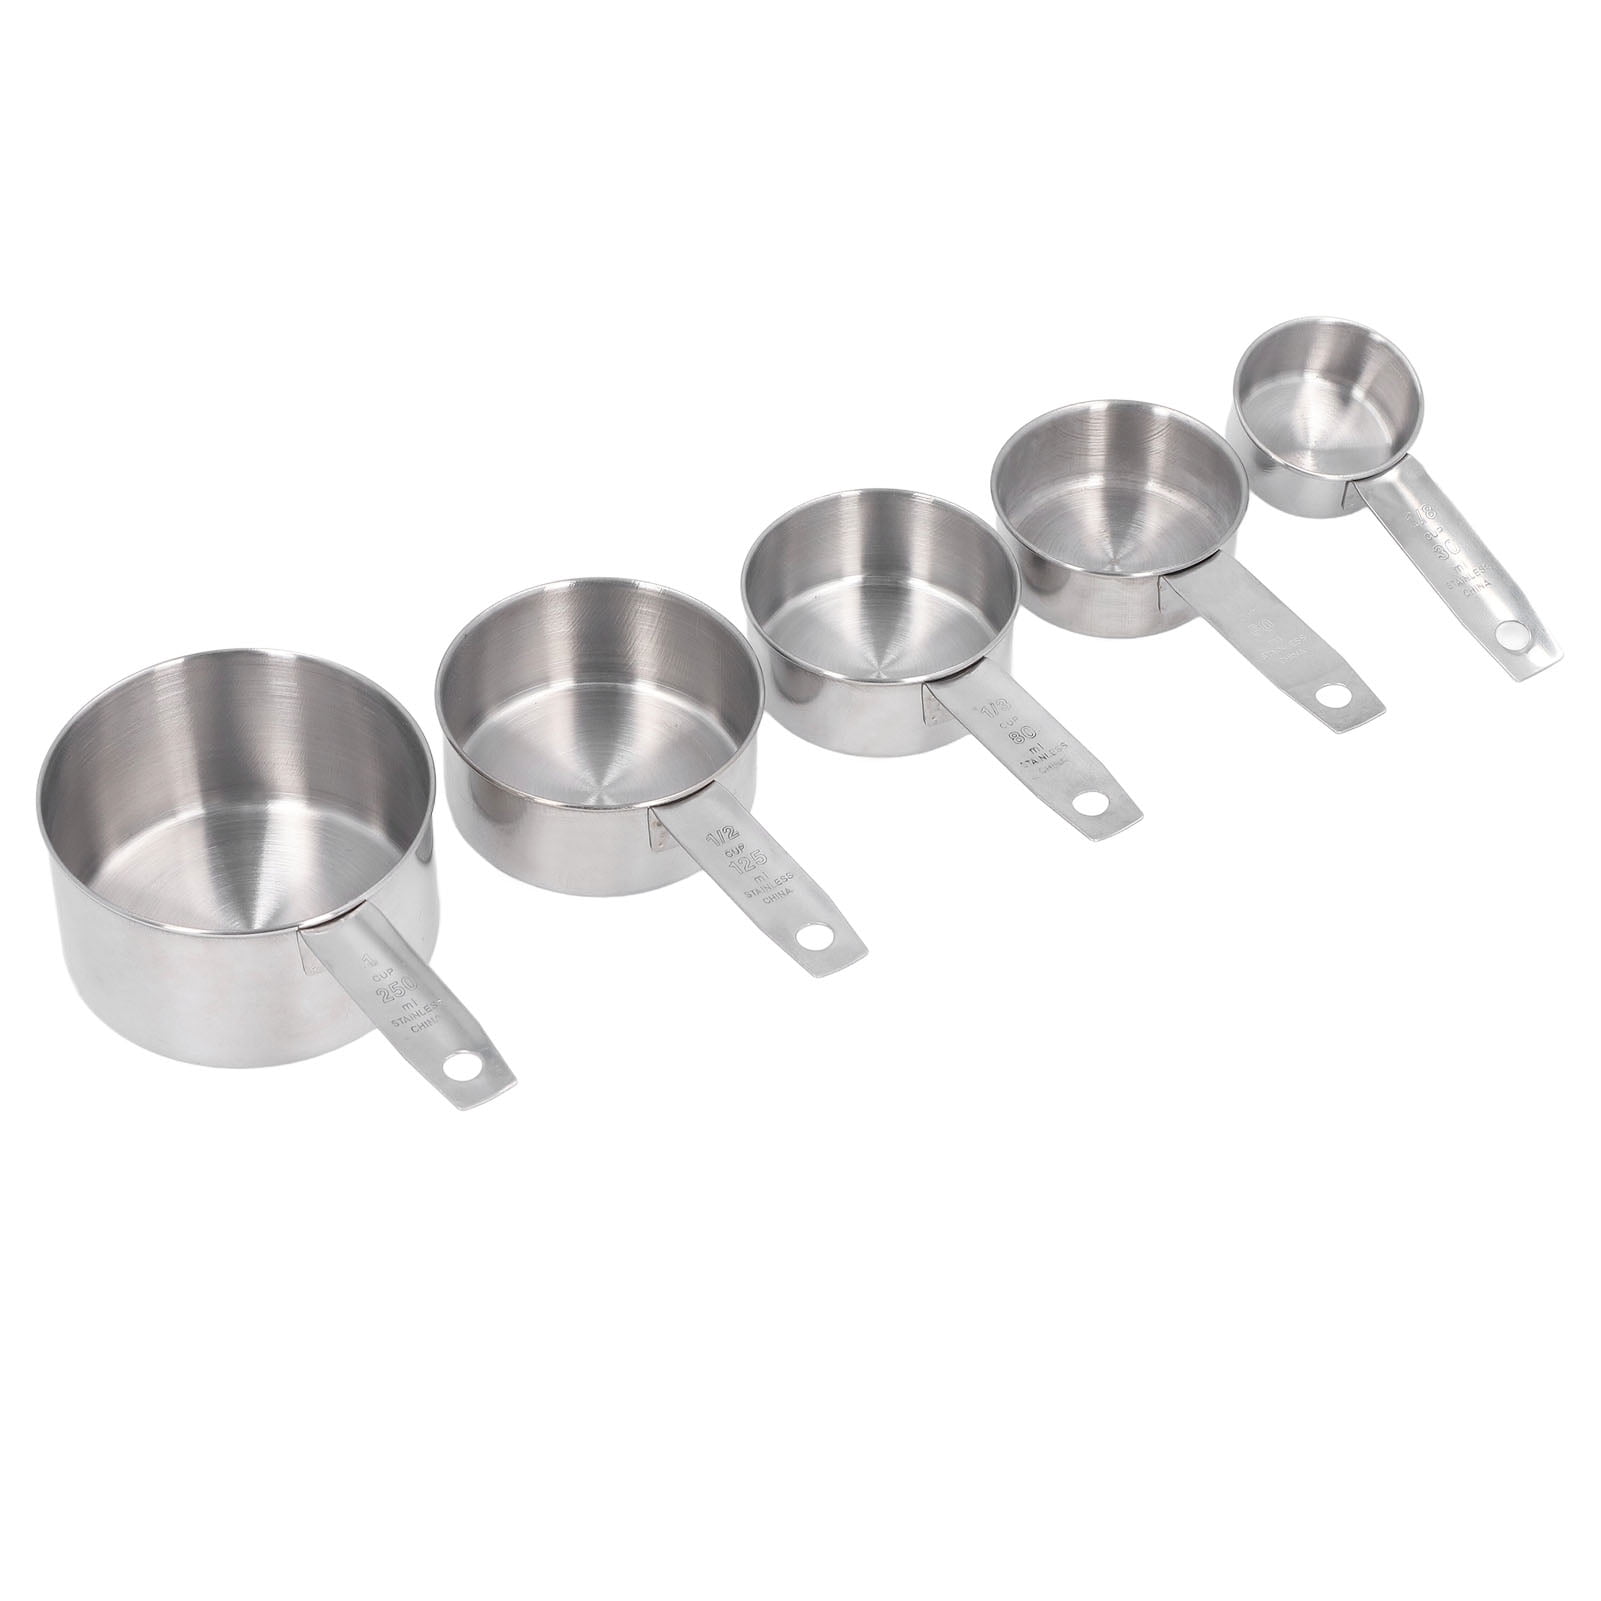 Bakeware Measuring Tools Scales, Measuring Cups Tools